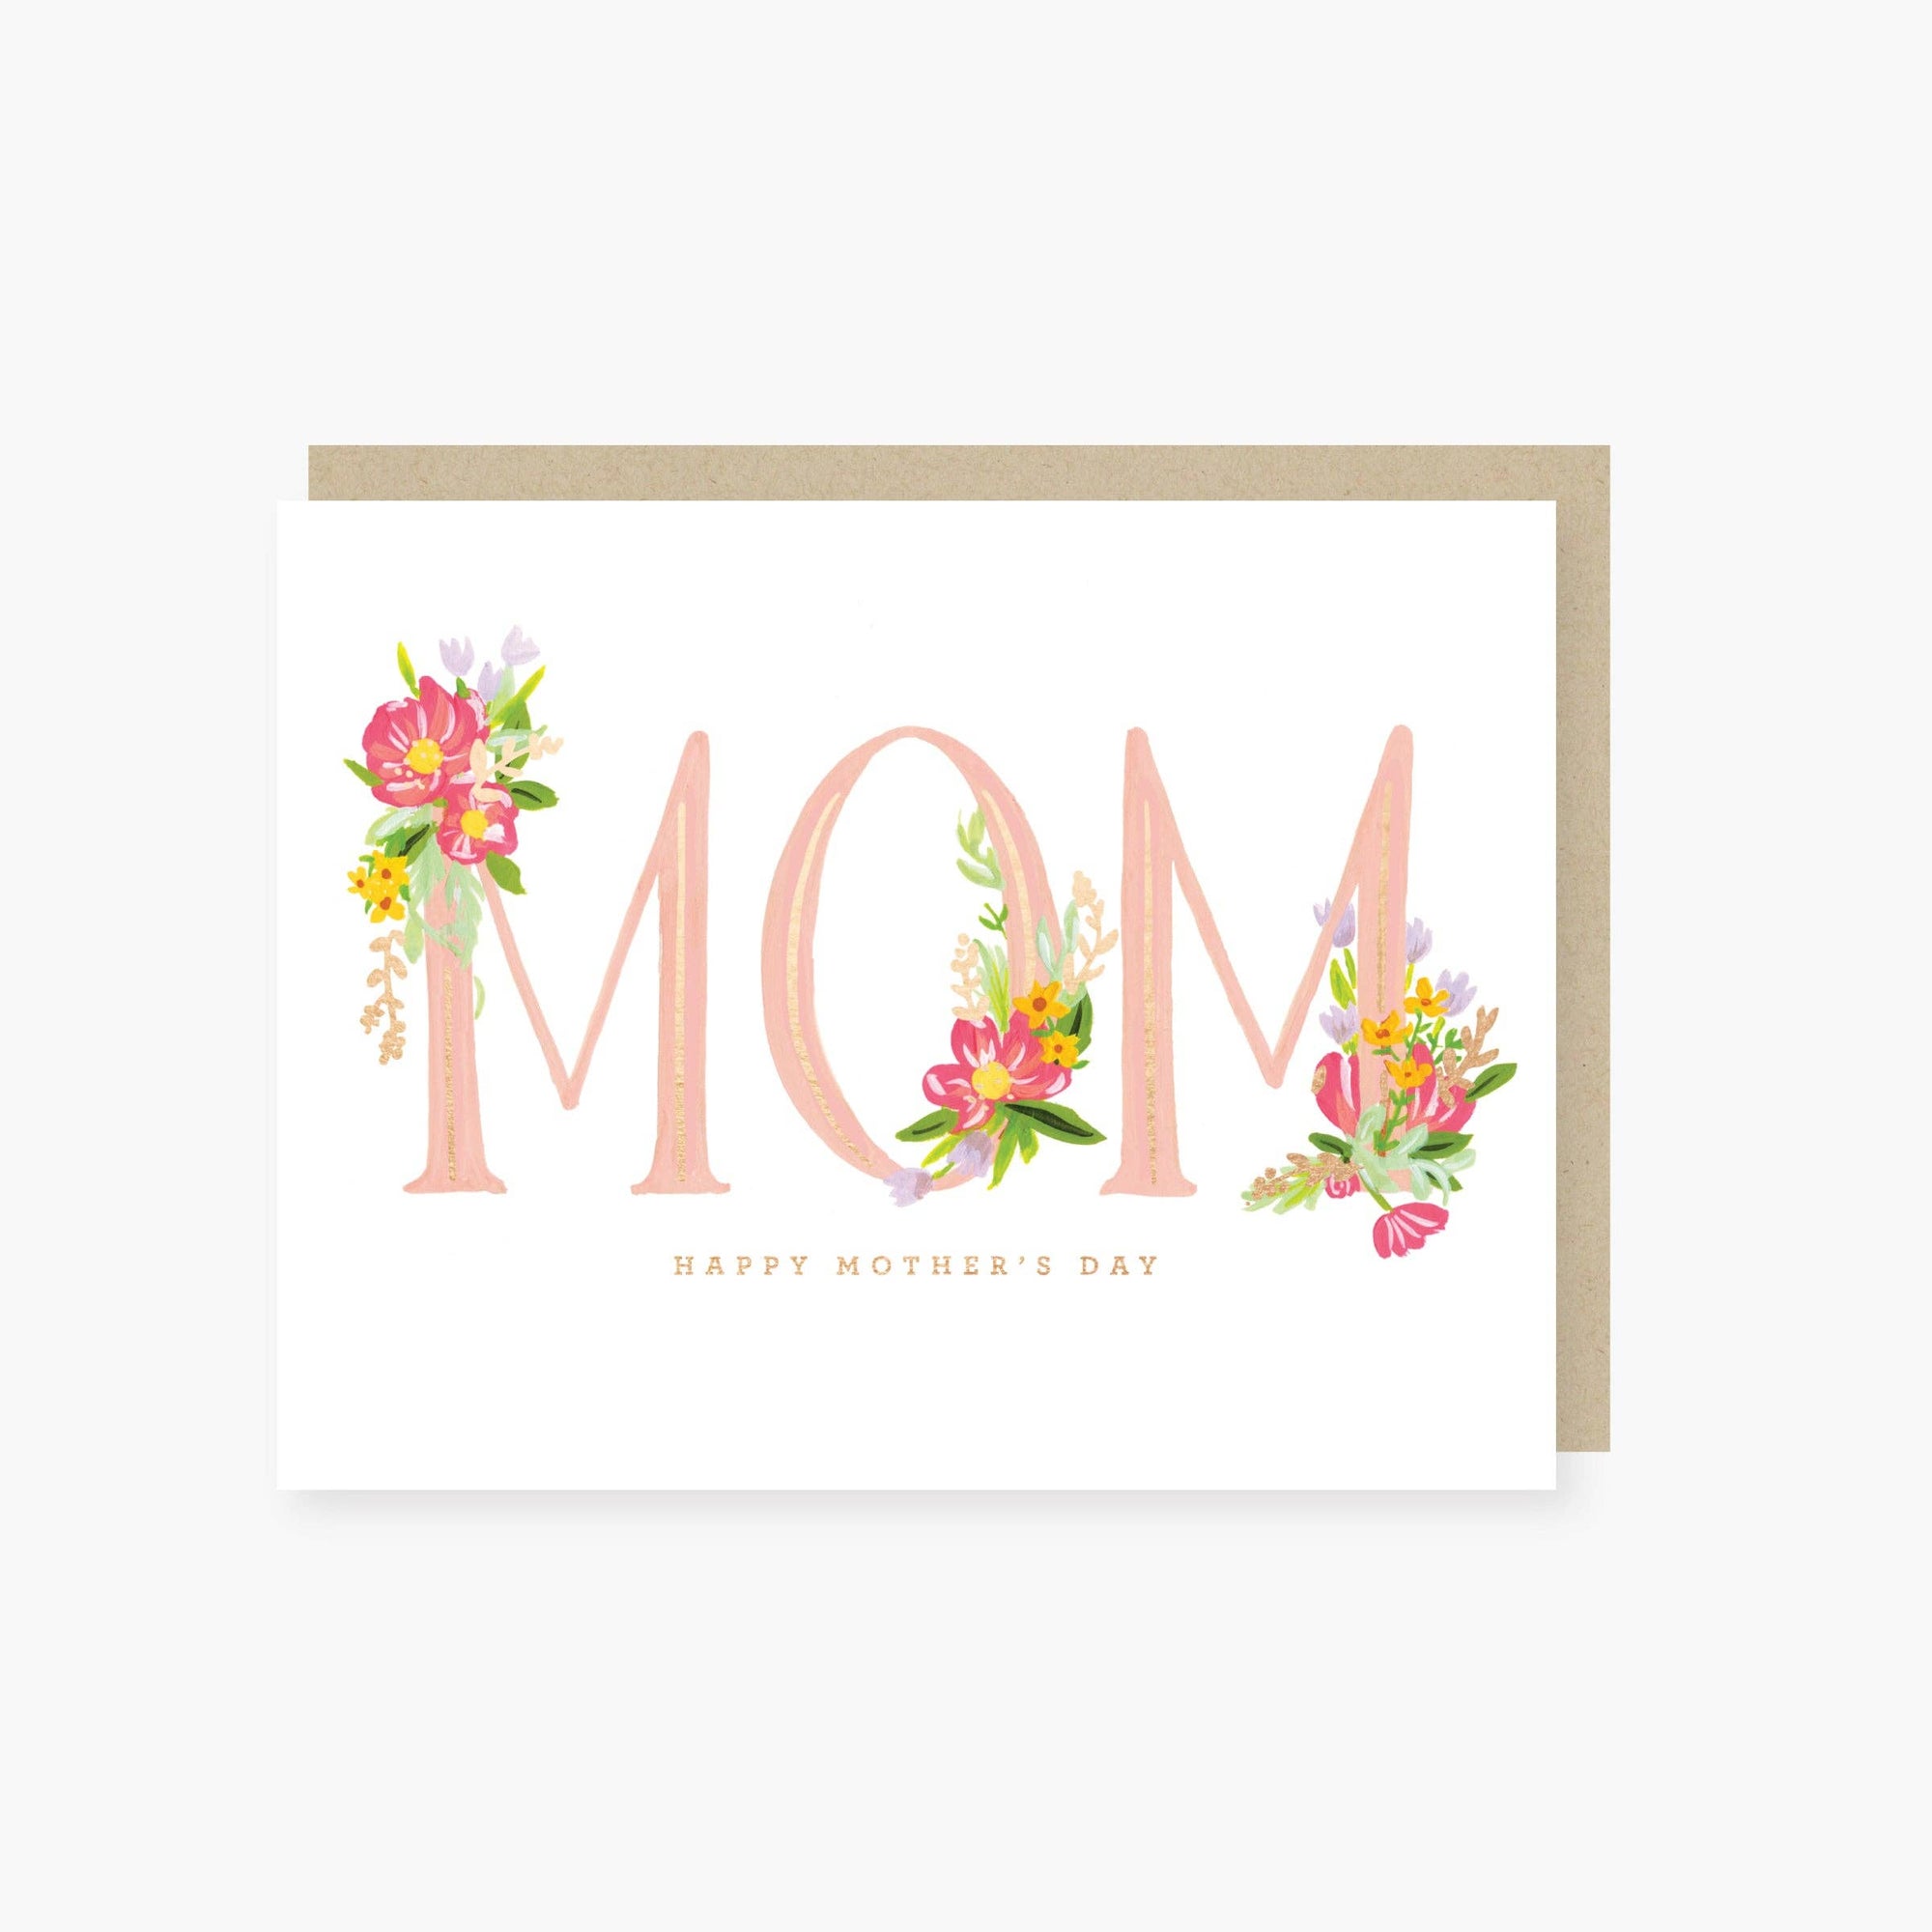 Floral letters foil mother's day card: Single